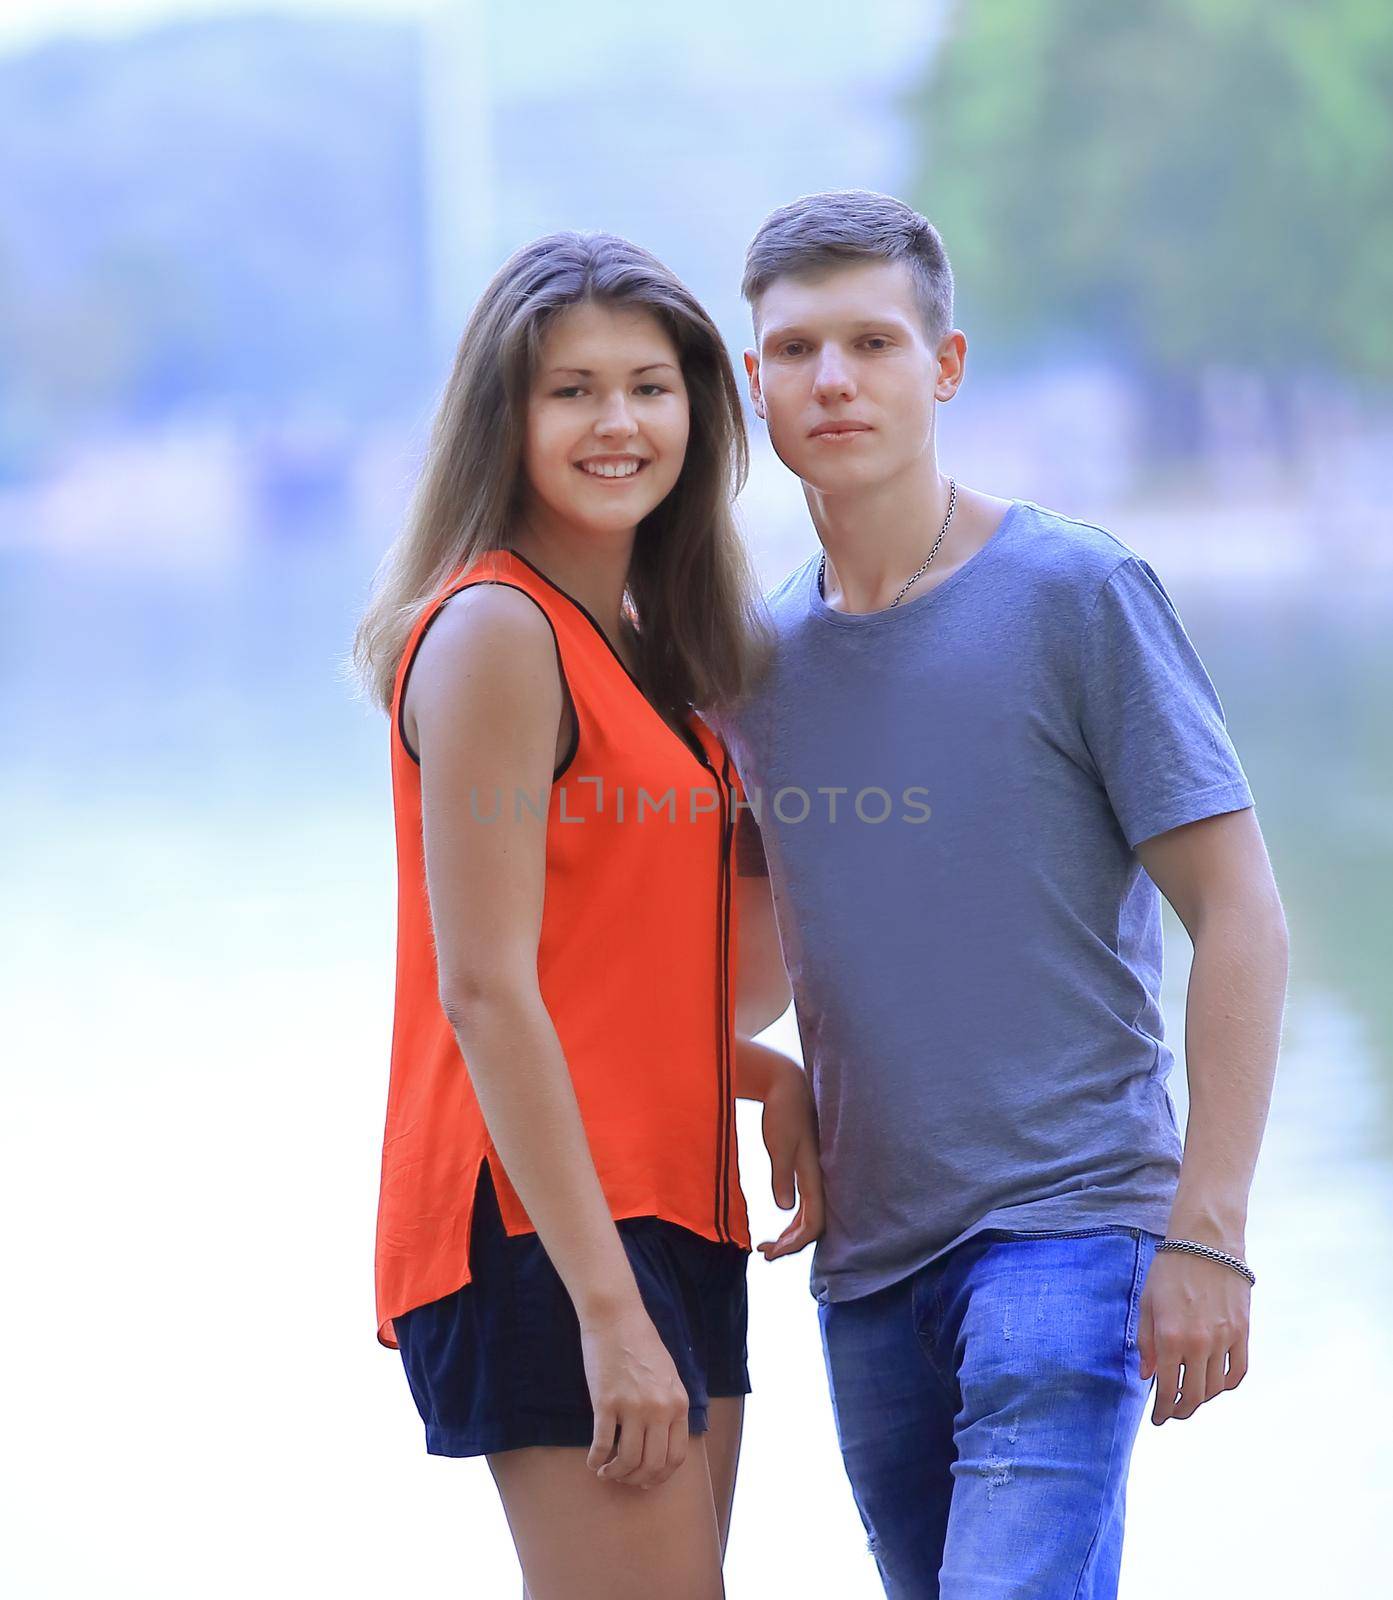 student pairs on blurred background of lake city.